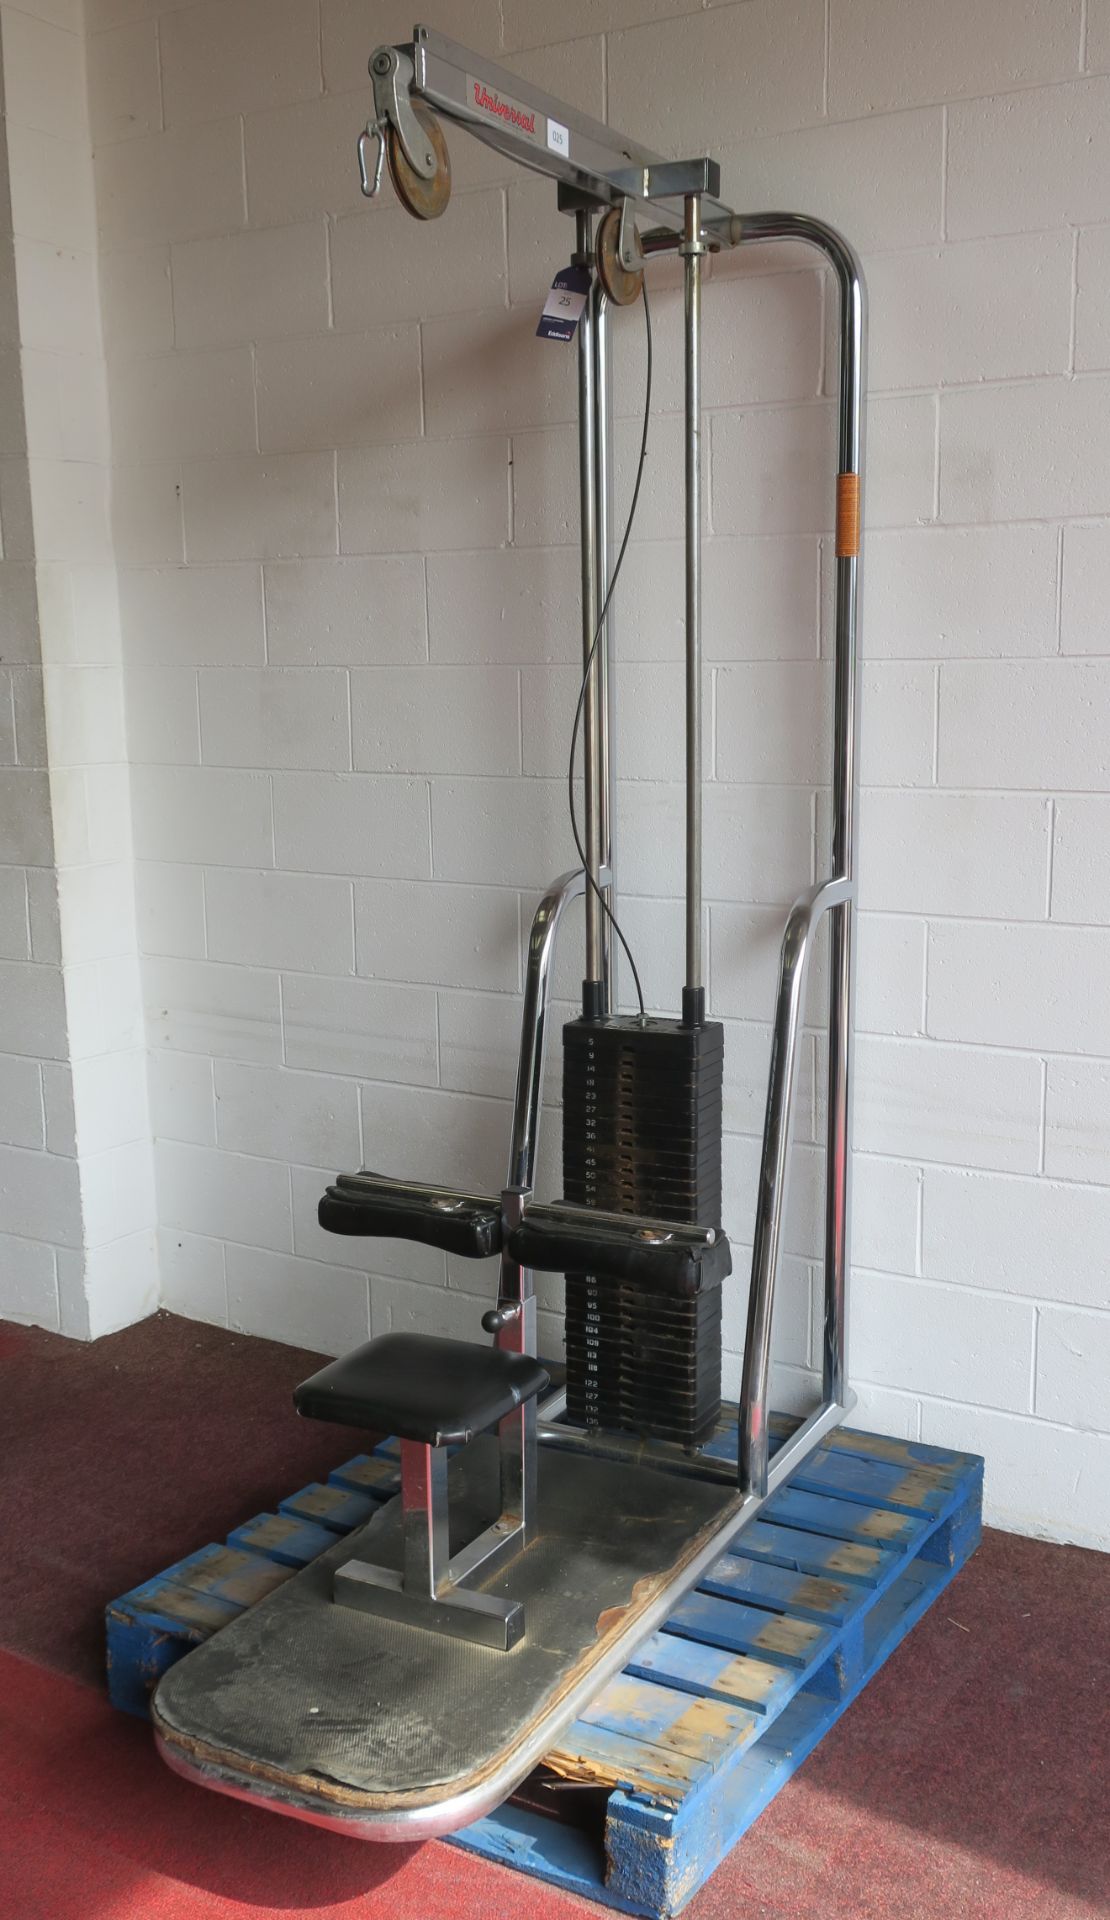 * A Universall Lateral Pulldown Machine 301036 S/N 0000087367. Please note there is a £10 Plus VAT - Image 2 of 4